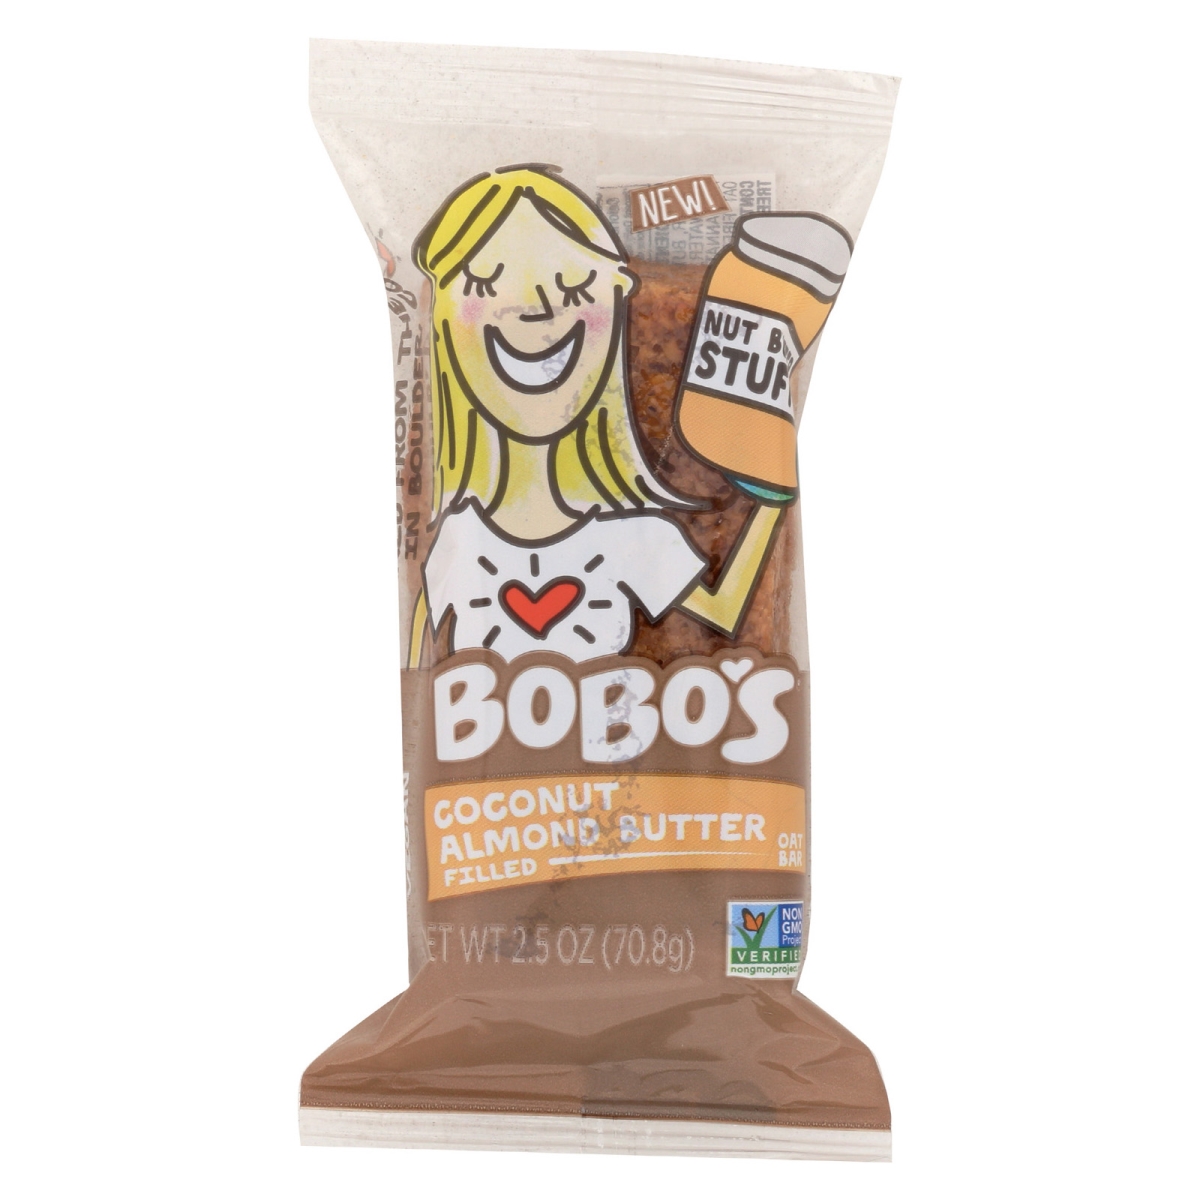 Picture of Bobos Oat Bars 2060481 2.5 oz Coconut Almond Butter Filled Oat Bar 